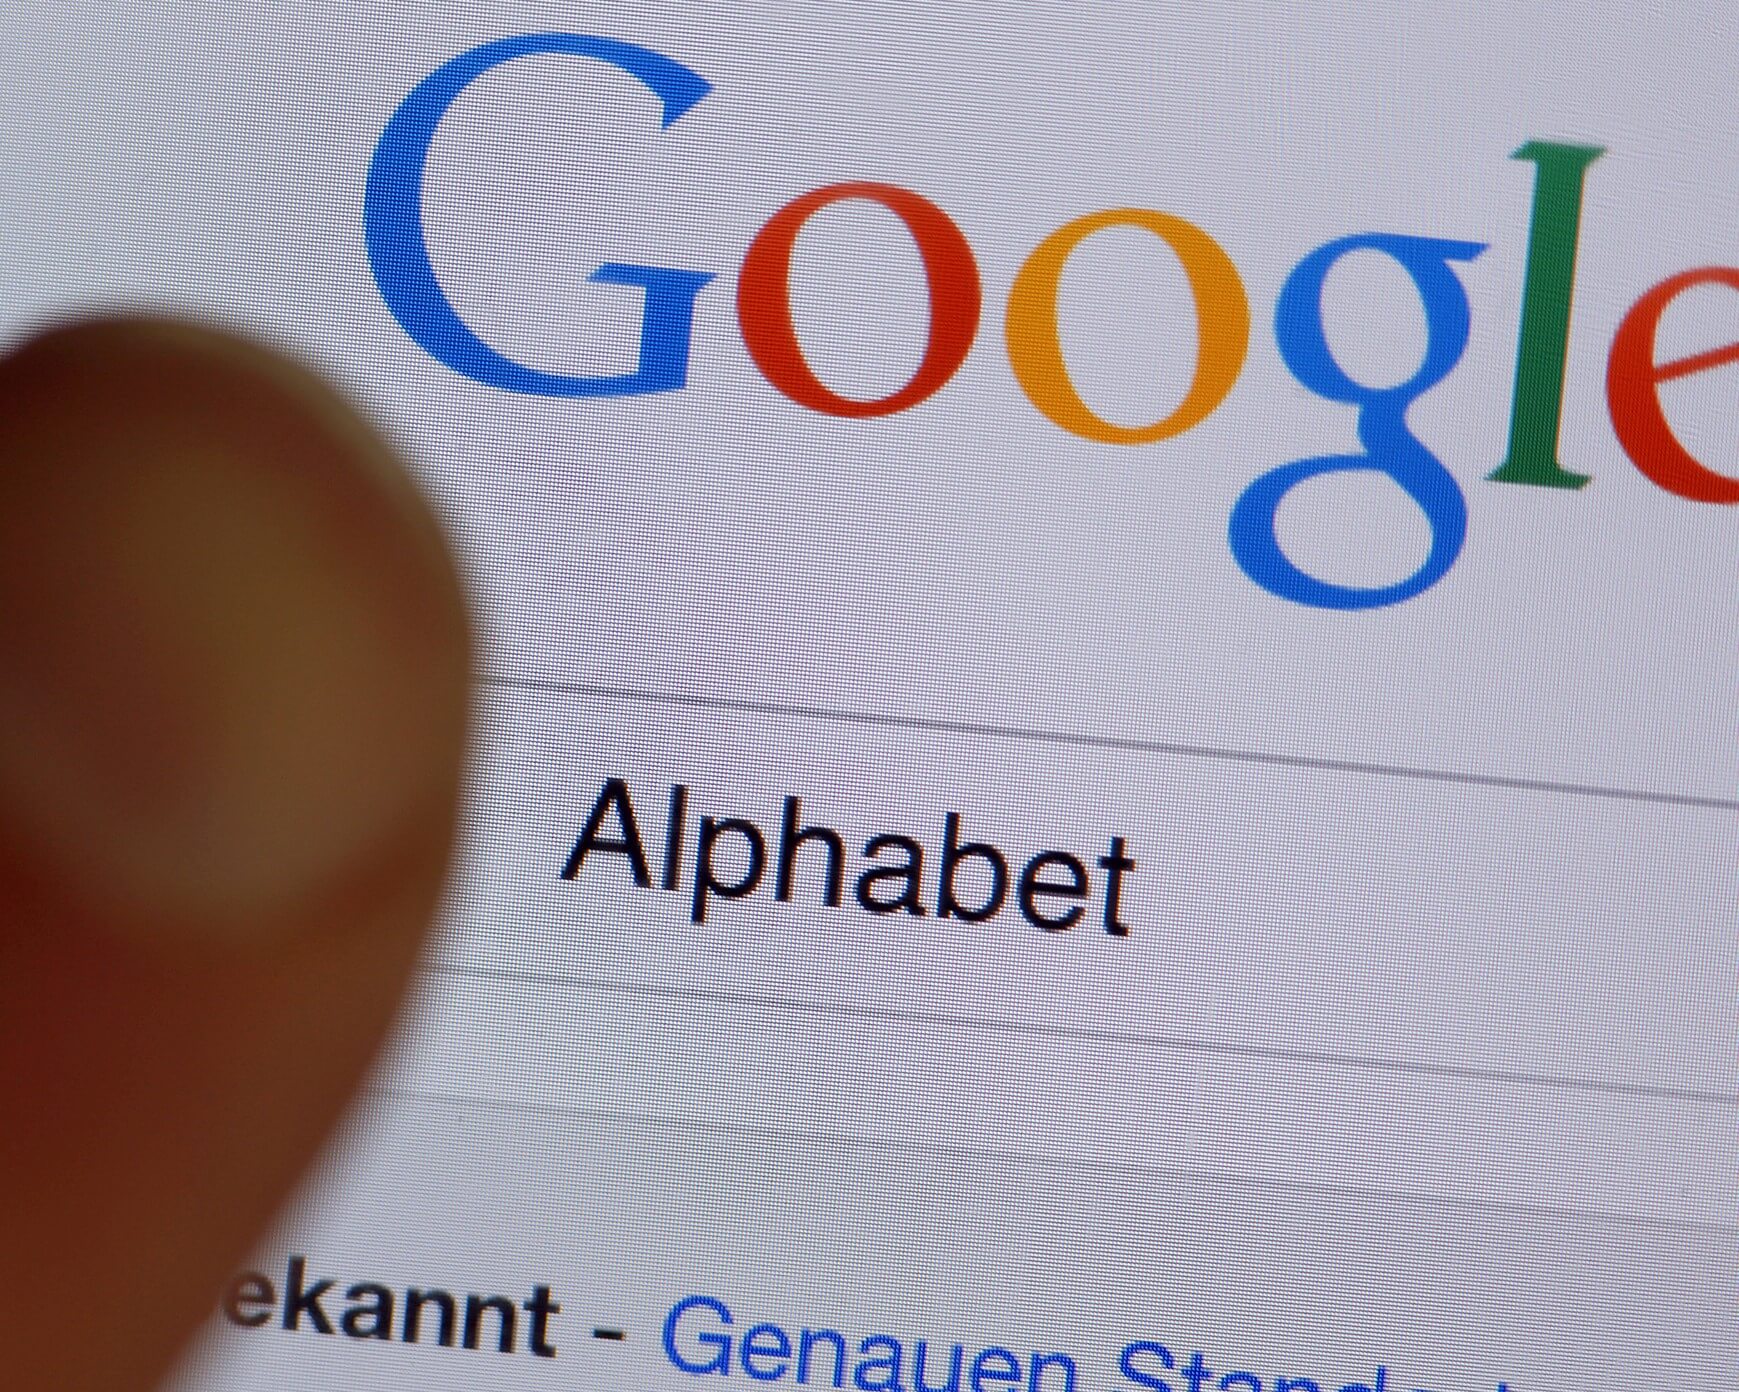 THE RISING TIDE OF ALPHABET, EXCEEDS PROJECTIONS